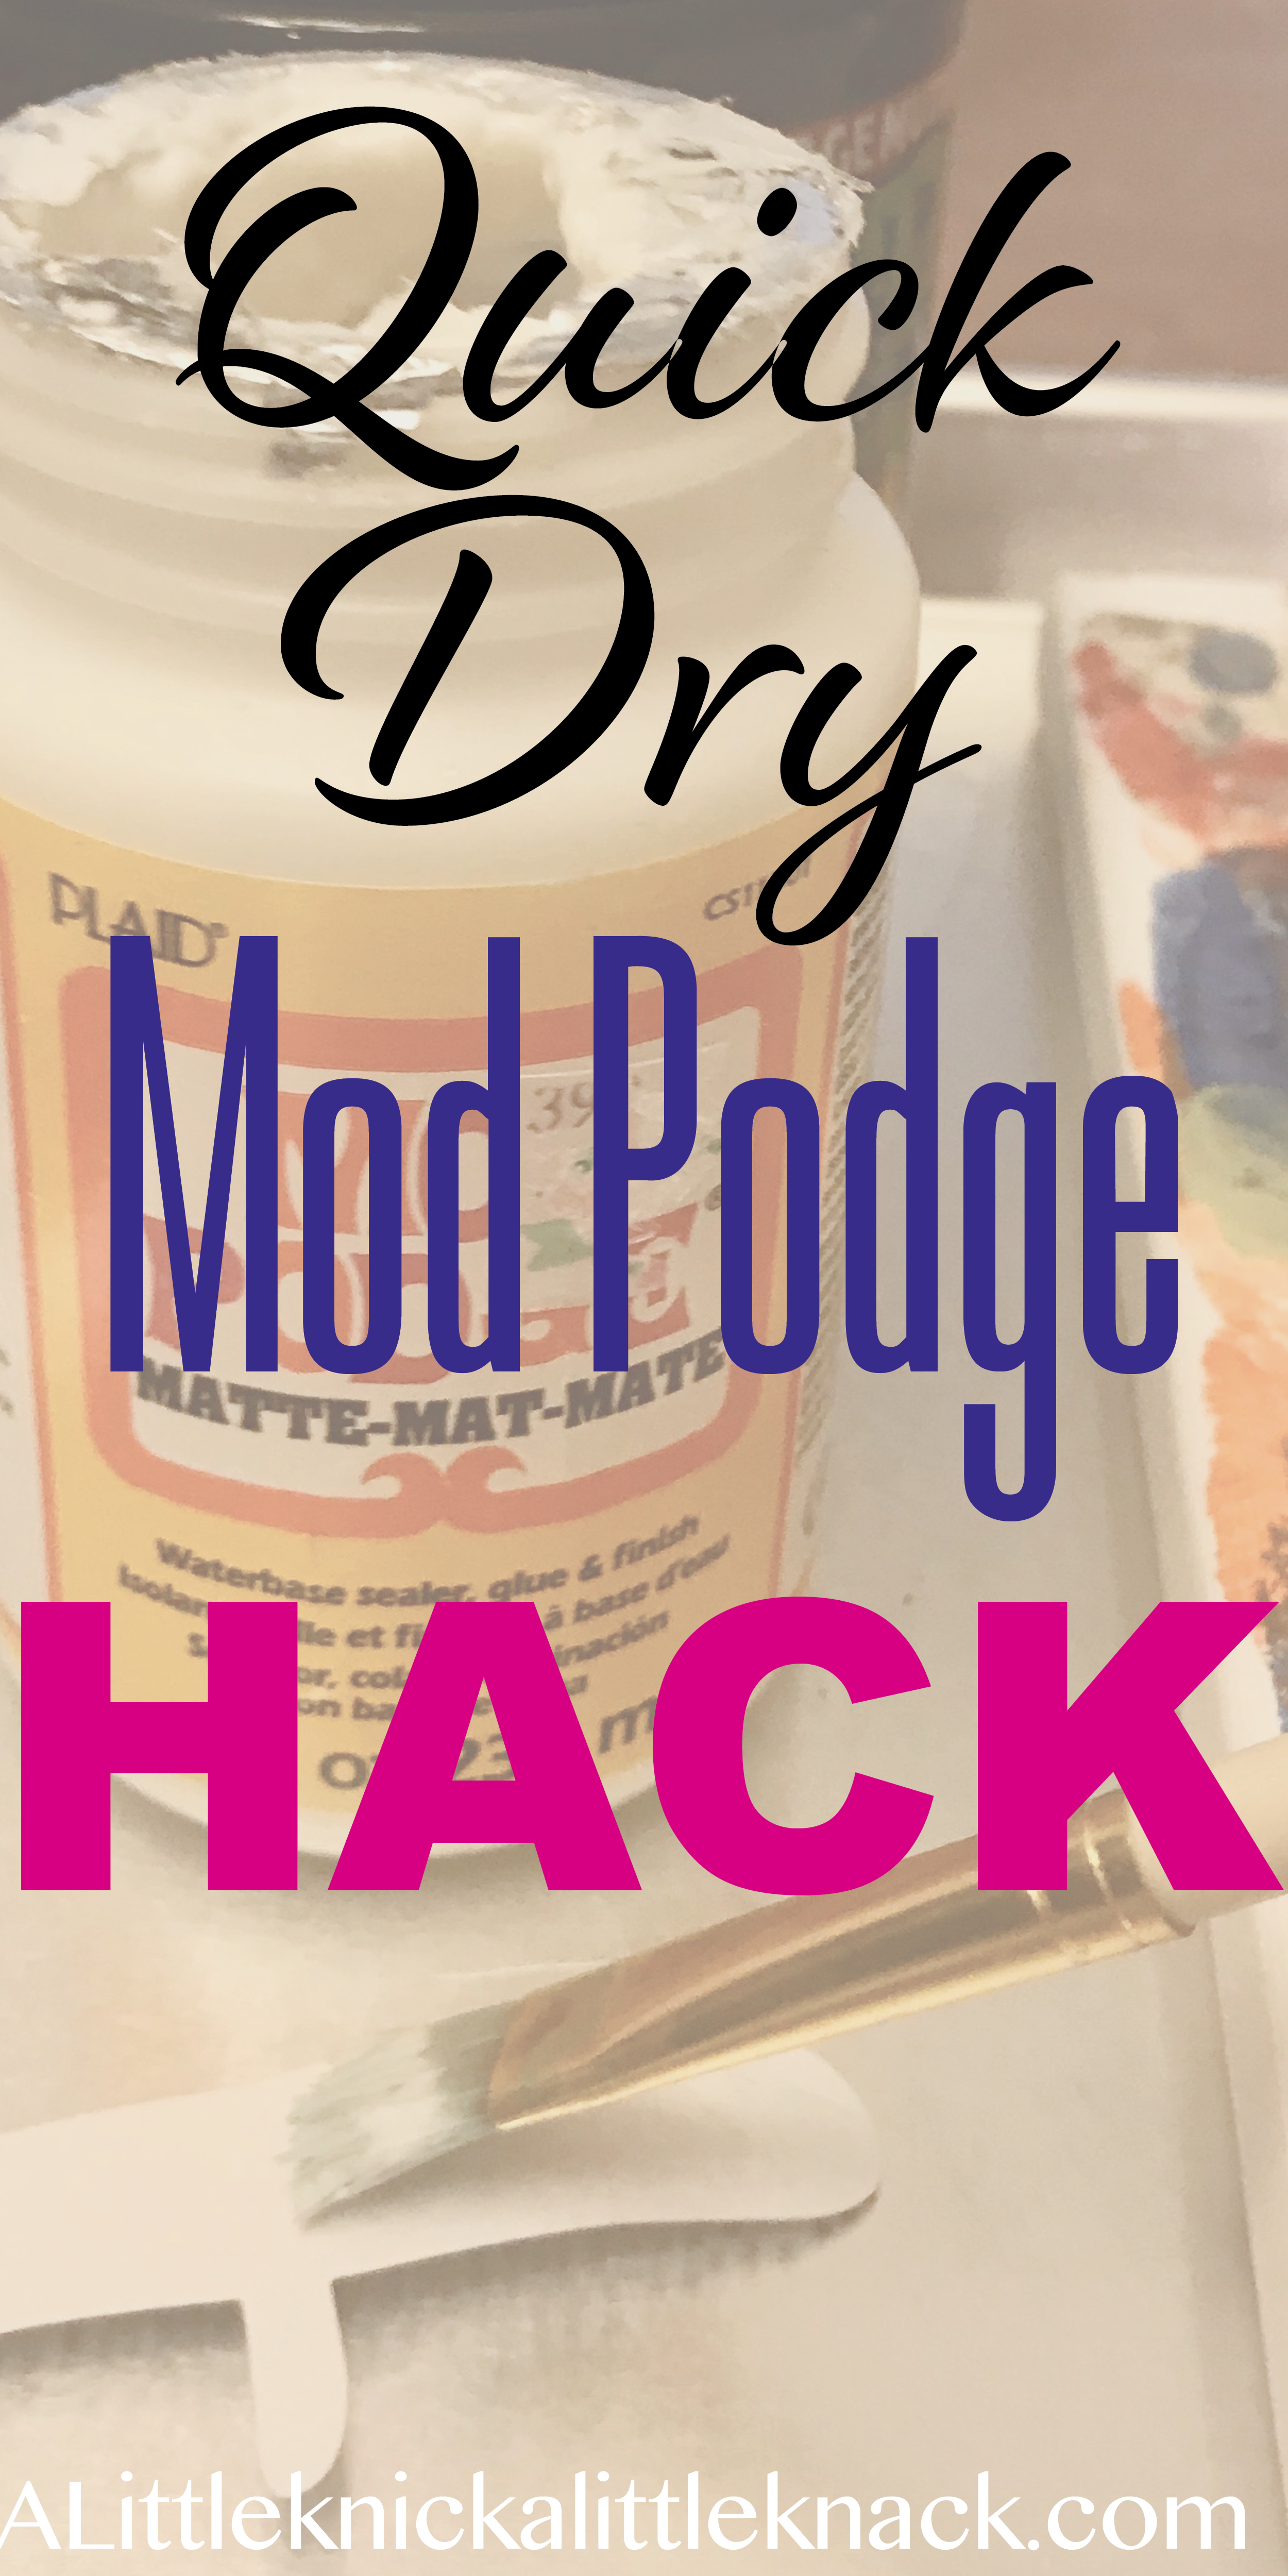 Love to craft but tired of never having enough time to finish your DIY projects? This super easy hack will help you dry mod podge quicker so you can get more done without the drying time wait!